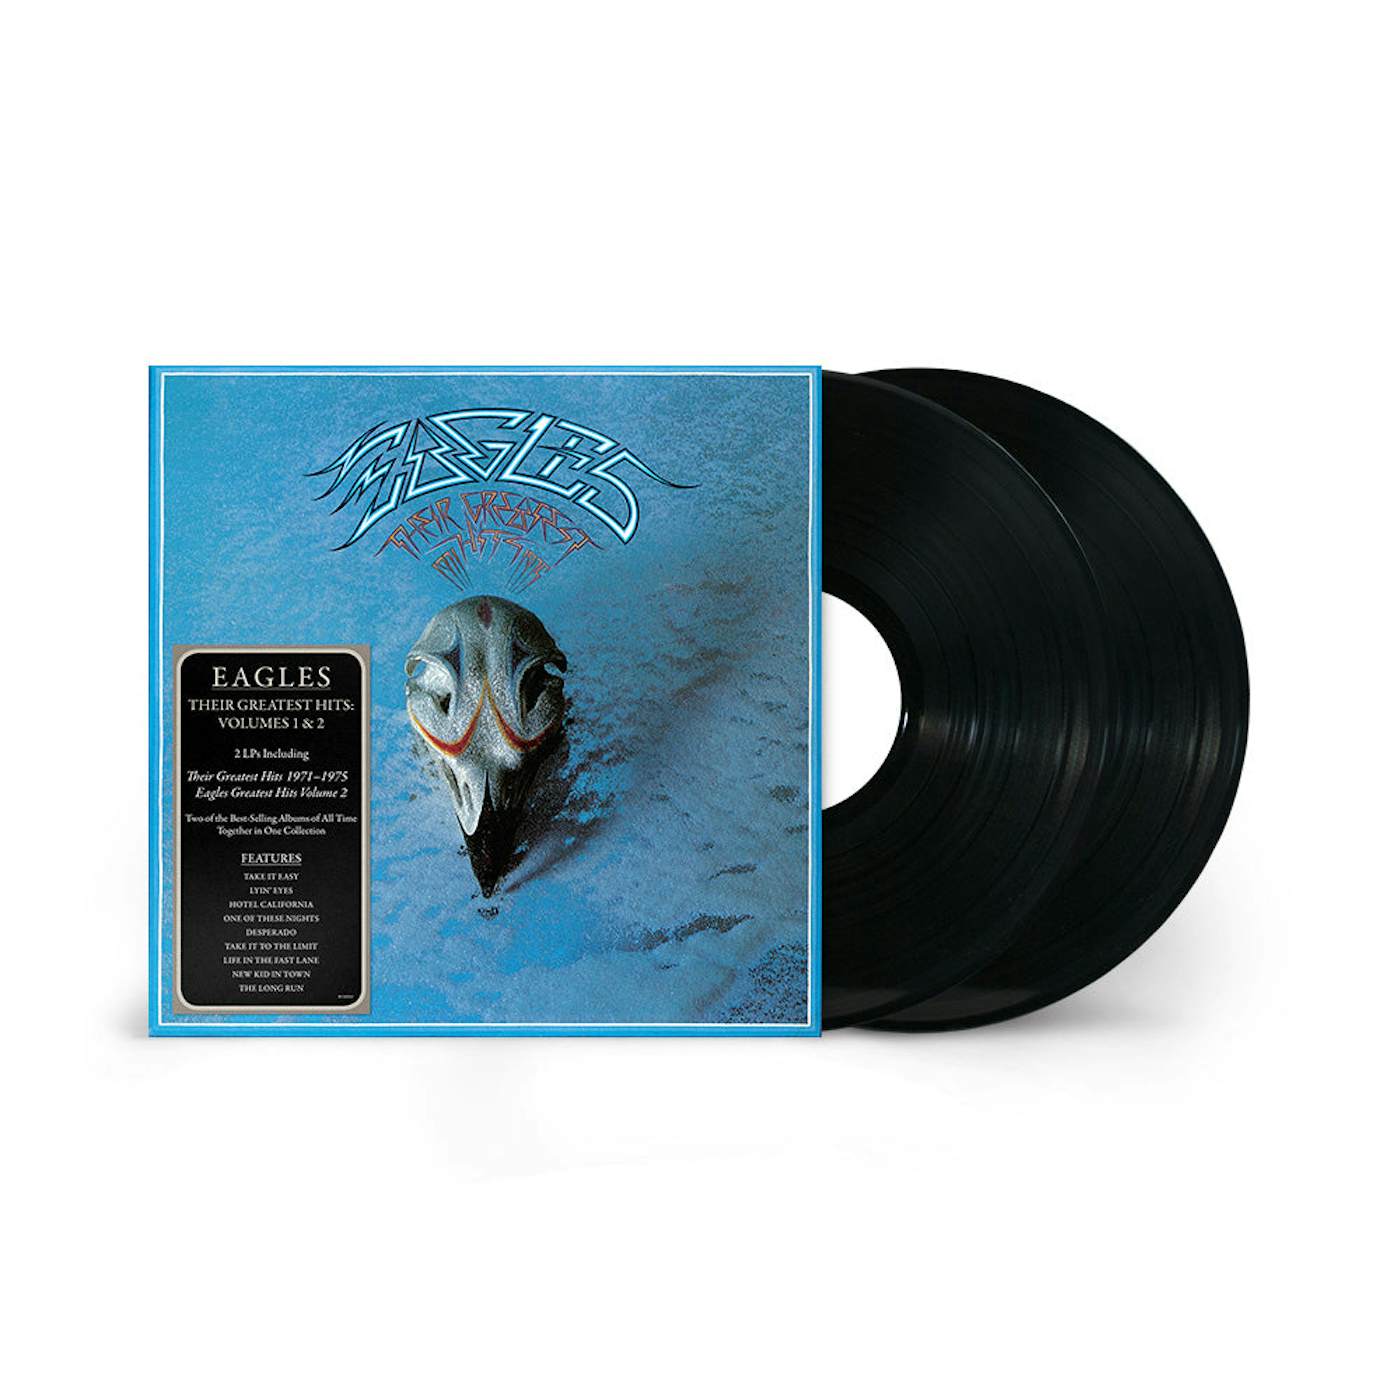 Eagles Their Greatest Hits Volumes 1 & 2 [2LP]